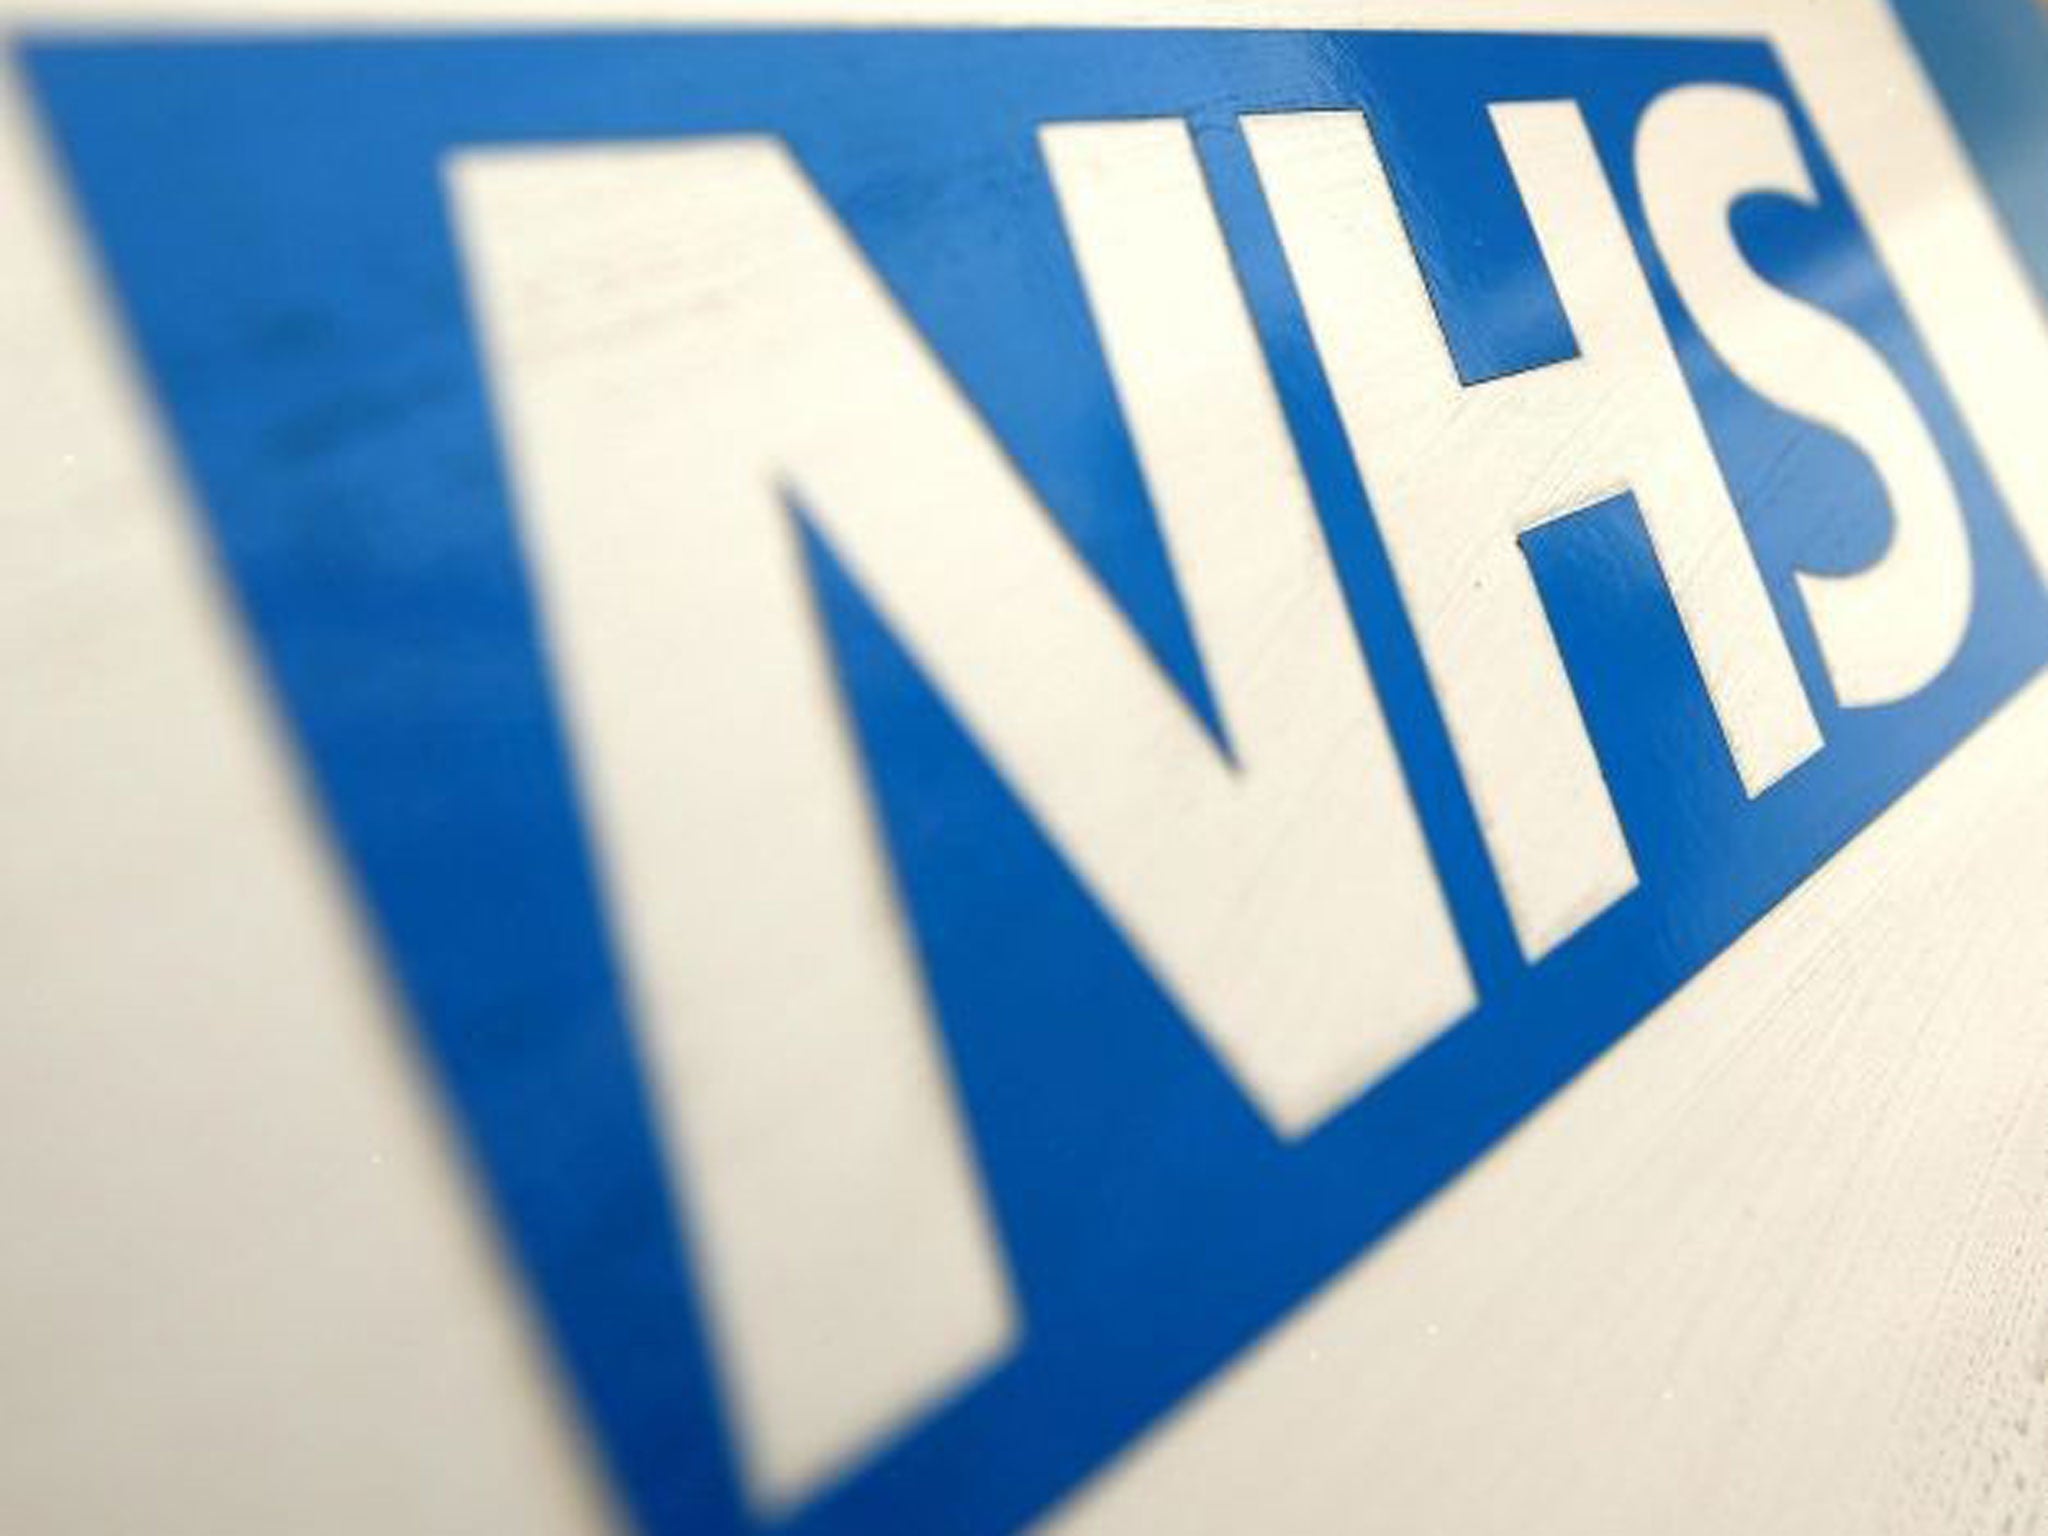 A new NHS Helpline has been putting peoples lives at risk, doctors are saying